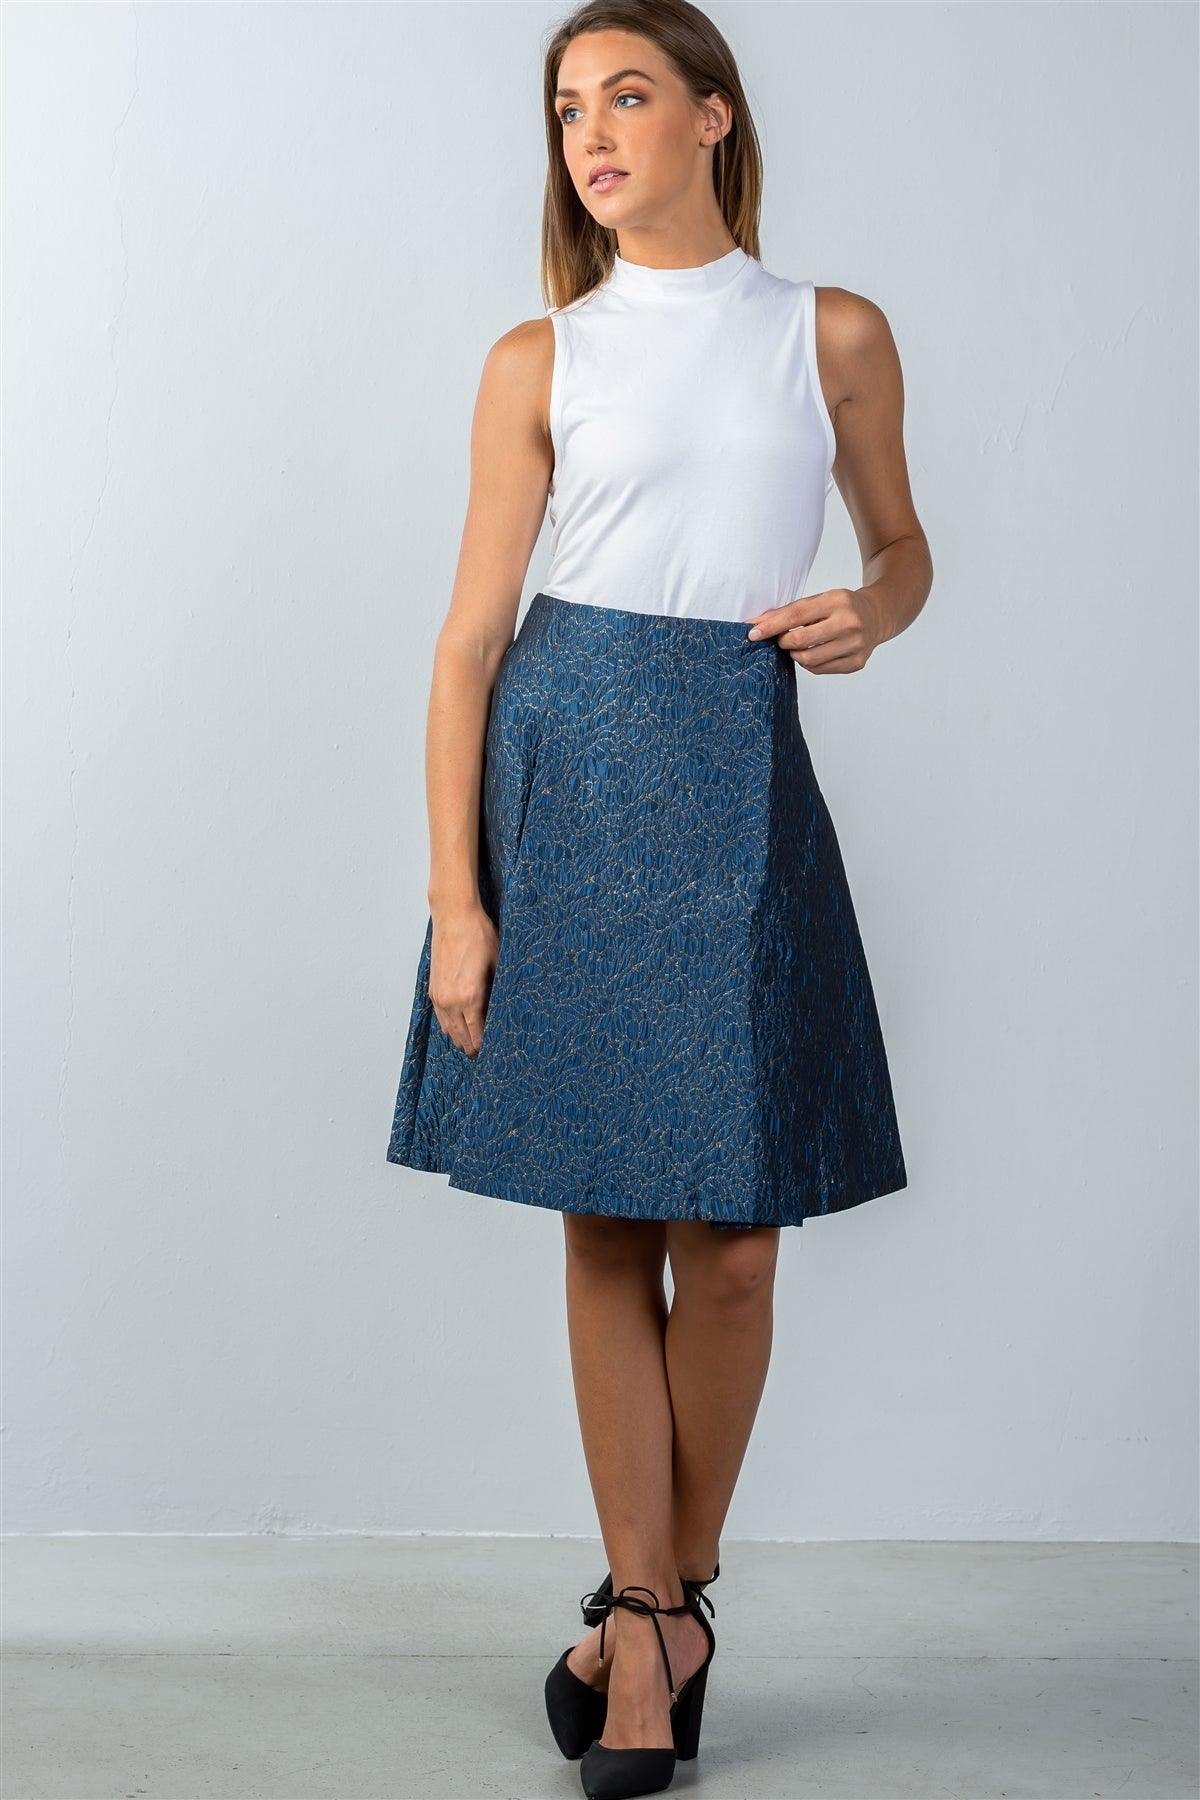 Blue Floral Pattern Textured Pleated Skirt /2-2-2